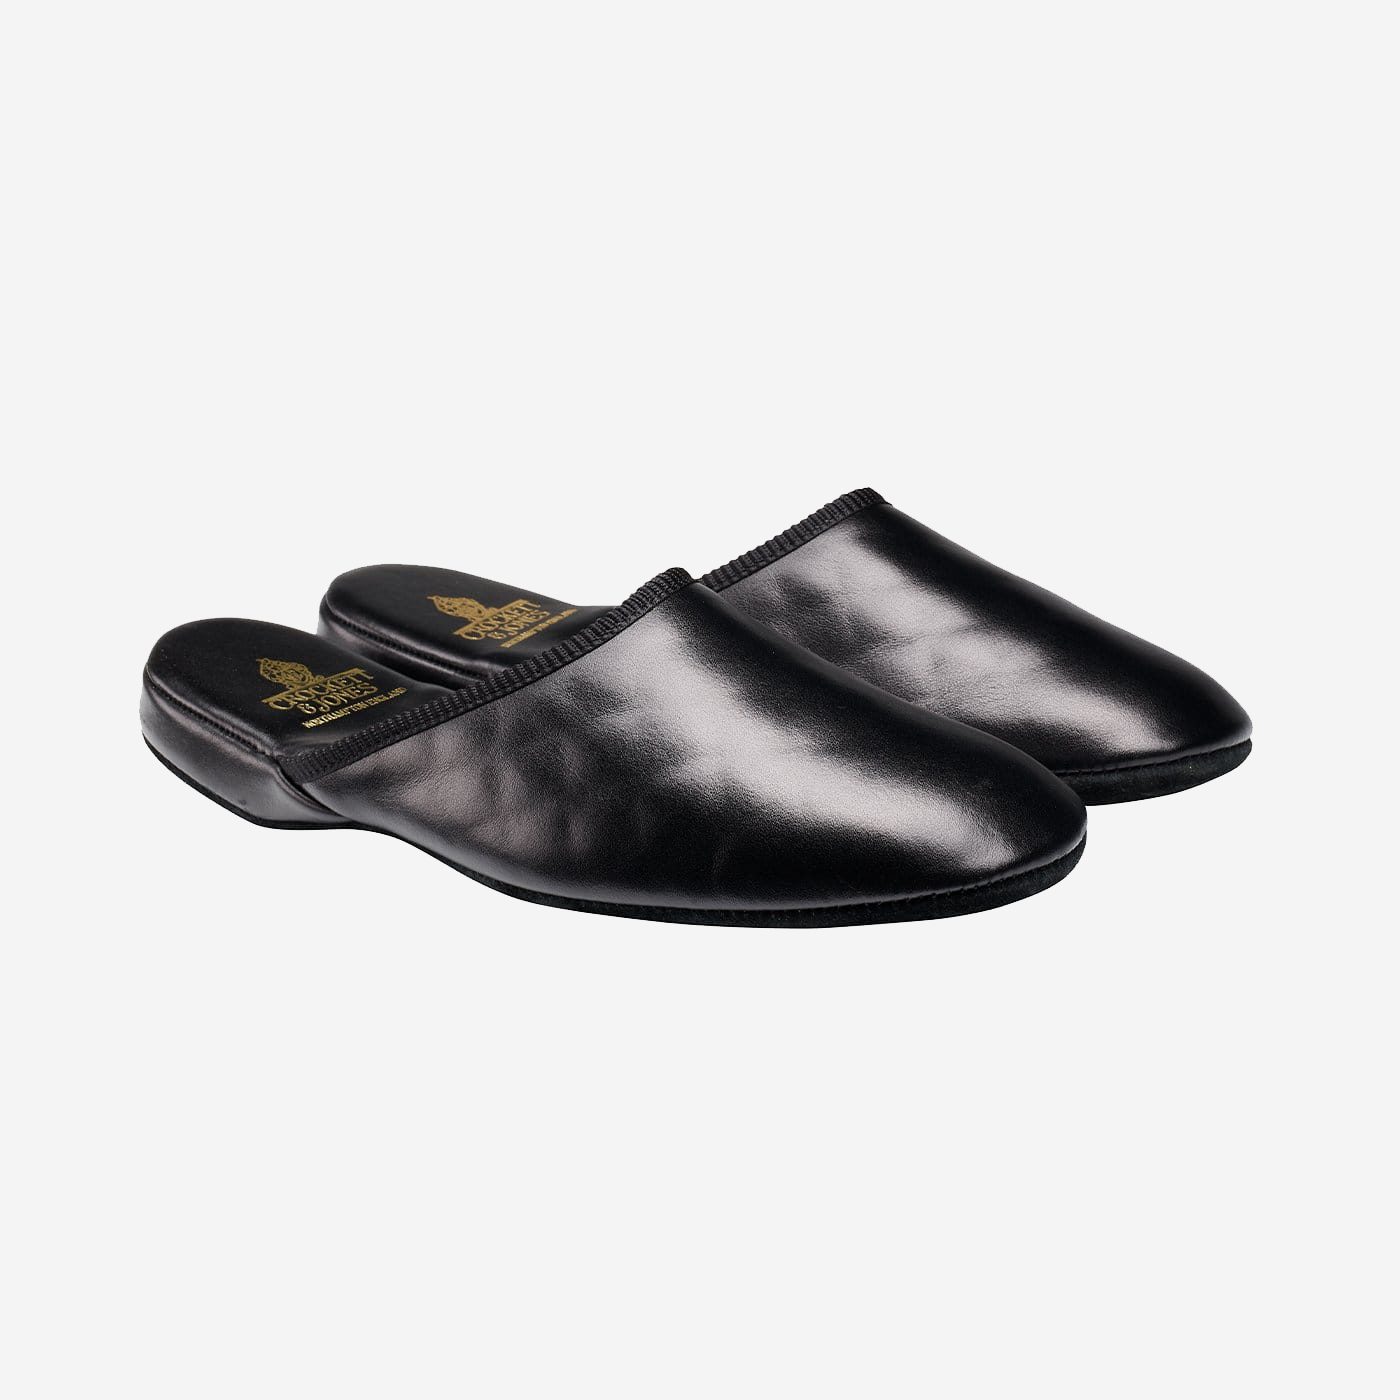 customizable mens fancy rubber slippers,high quality| Alibaba.com